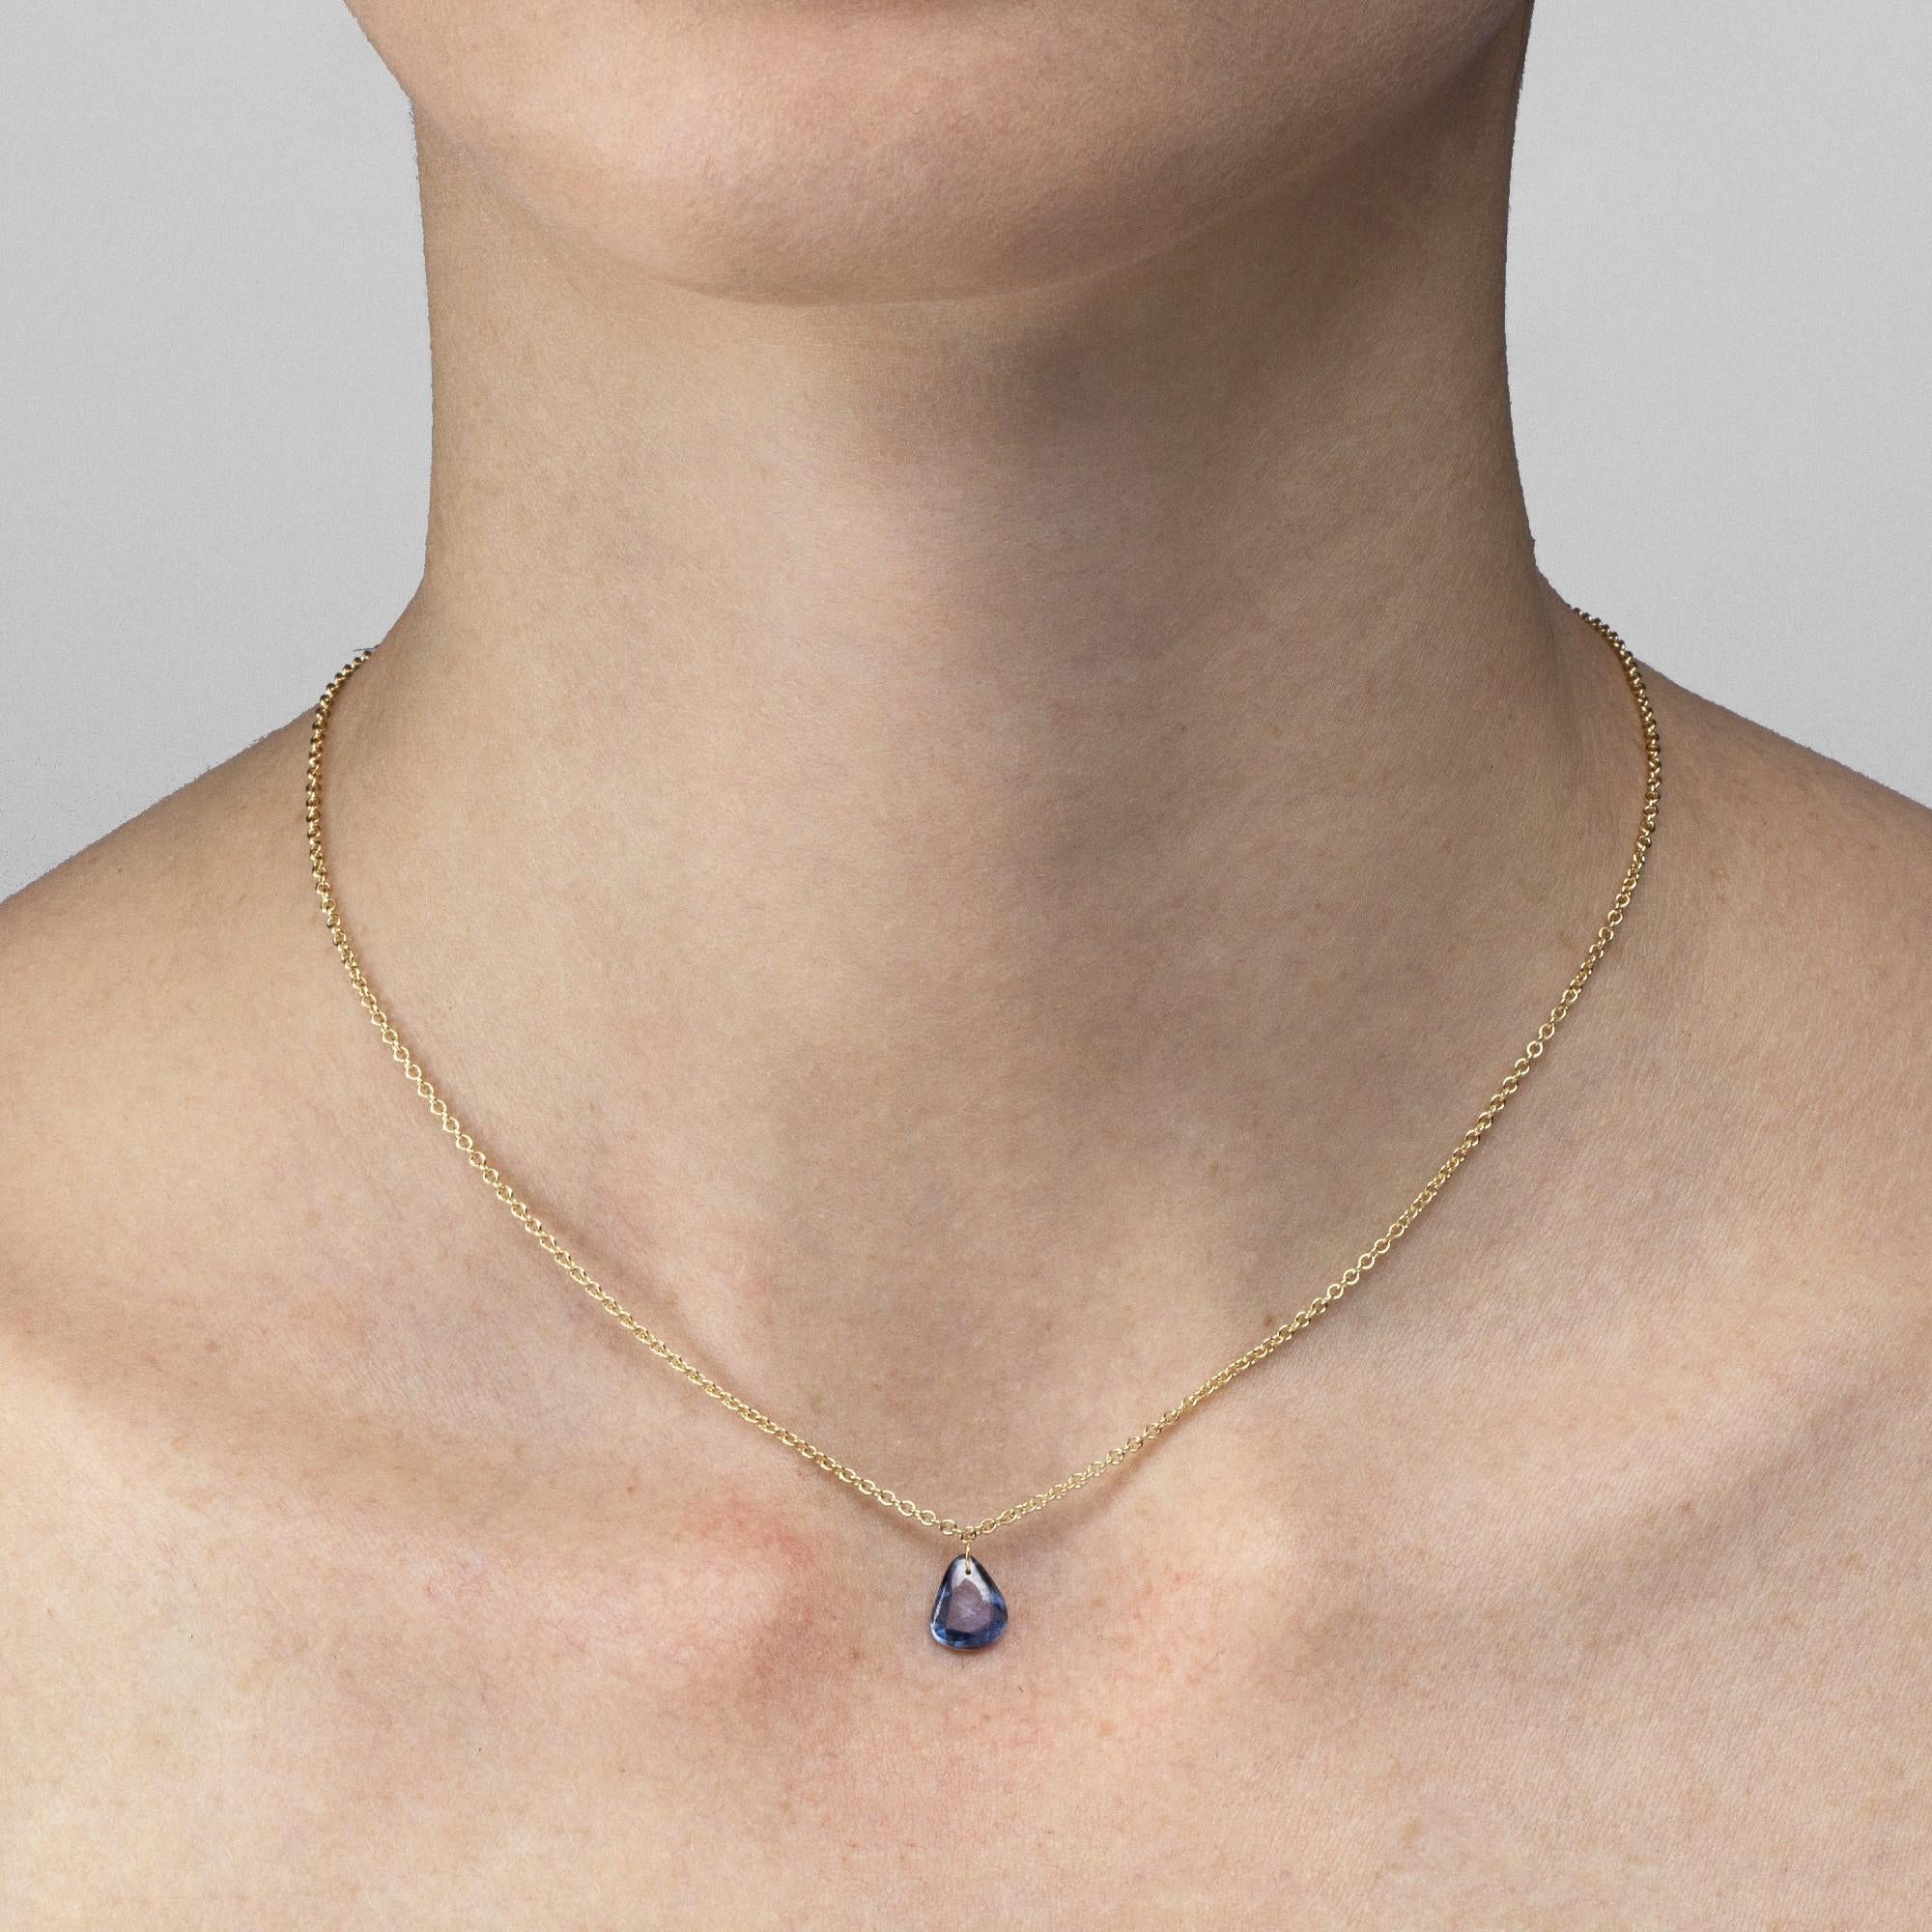 Alex Jona design collection, hand crafted in Italy, 18 Karat yellow gold chain necklace suspending a flat cut blue sapphire weighing 1.39 carats. Dimensions: L x 18.11 in / L x 45cm.

Alex Jona jewels stand out, not only for their special design and